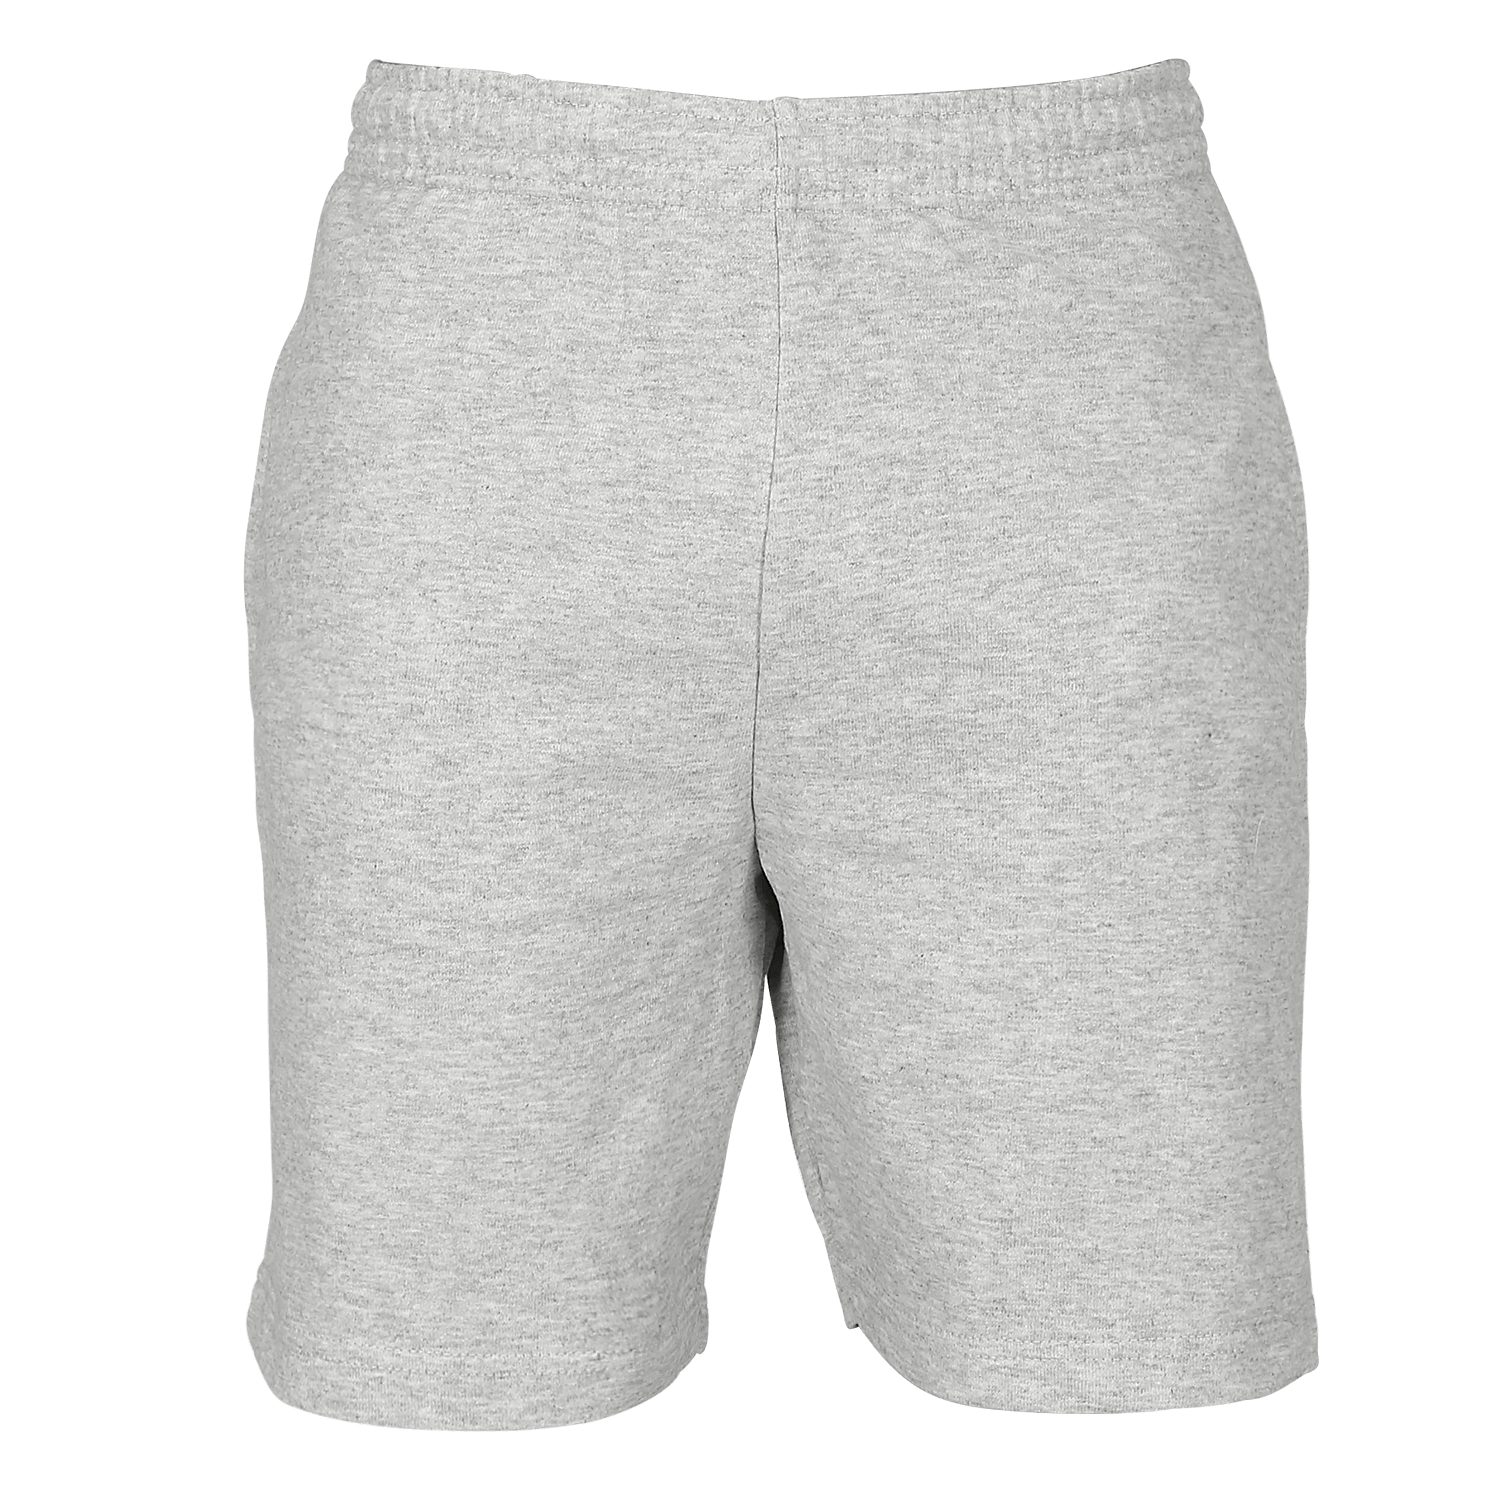 Fruit of the Loom Homewearhose Fruit graumeliert of Loom Lightweight the Shorts